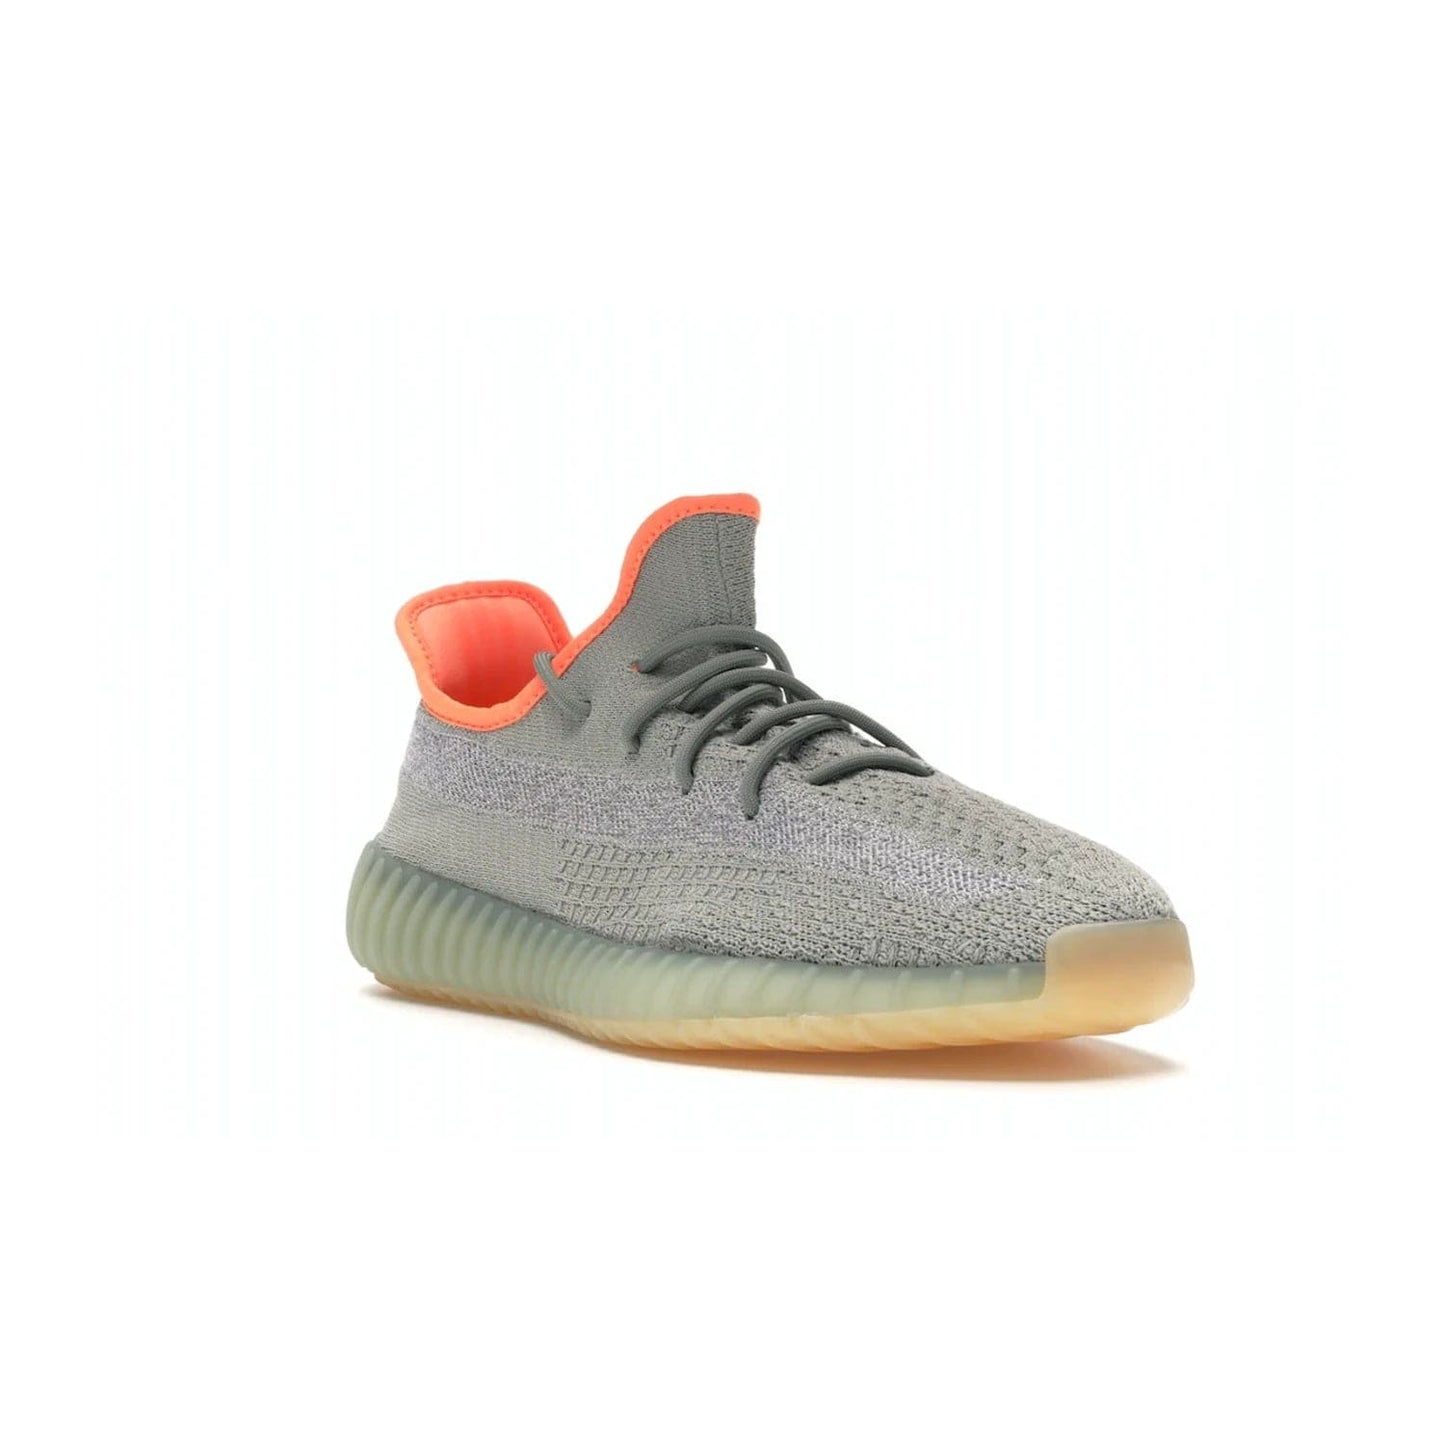 adidas Yeezy Boost 350 V2 Desert Sage - Image 6 - Only at www.BallersClubKickz.com - Upgrade your style with the adidas Yeezy Boost 350 V2 Desert Sage. This 350V2 features a Desert Sage primeknit upper with tonal side stripe, and an orange-highlighted translucent Boost cushioning sole. Stay on-trend in effortless style.